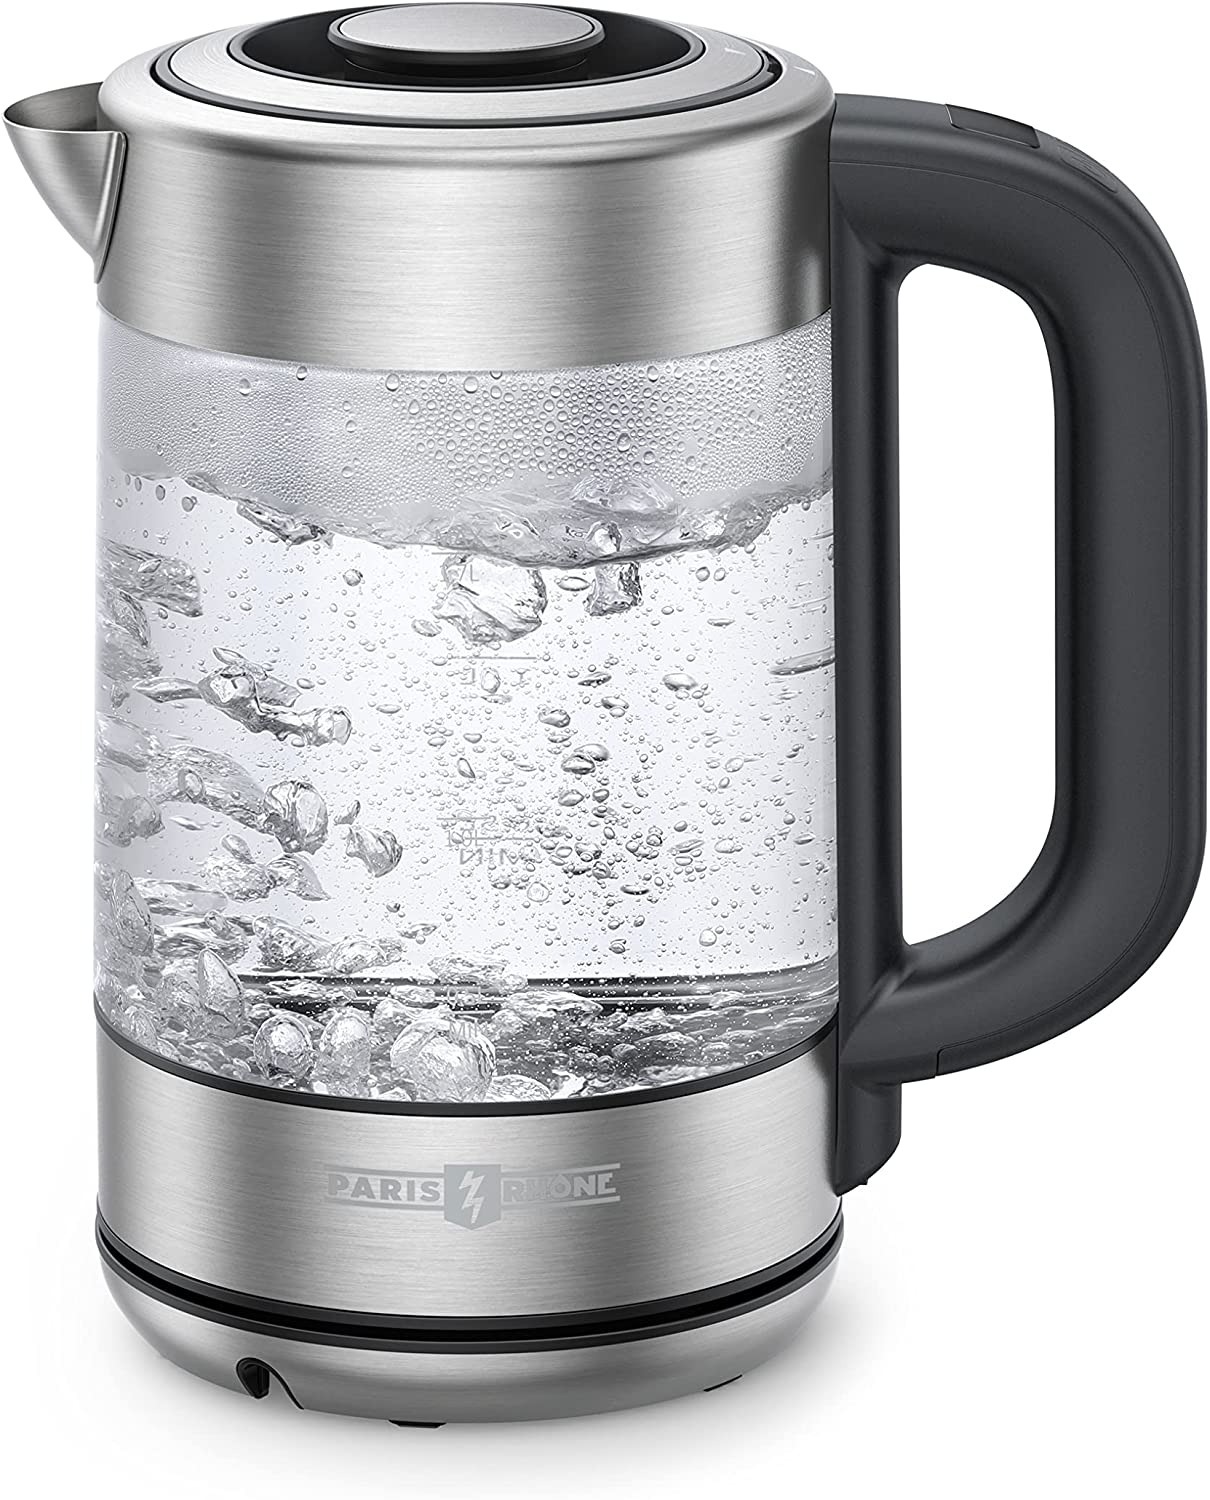 Paris Rhône1.7L Glass & Stainless Electric Kettle with 6 Temperature Settings, Touch Control $29.99 +FS With Prime or $25+